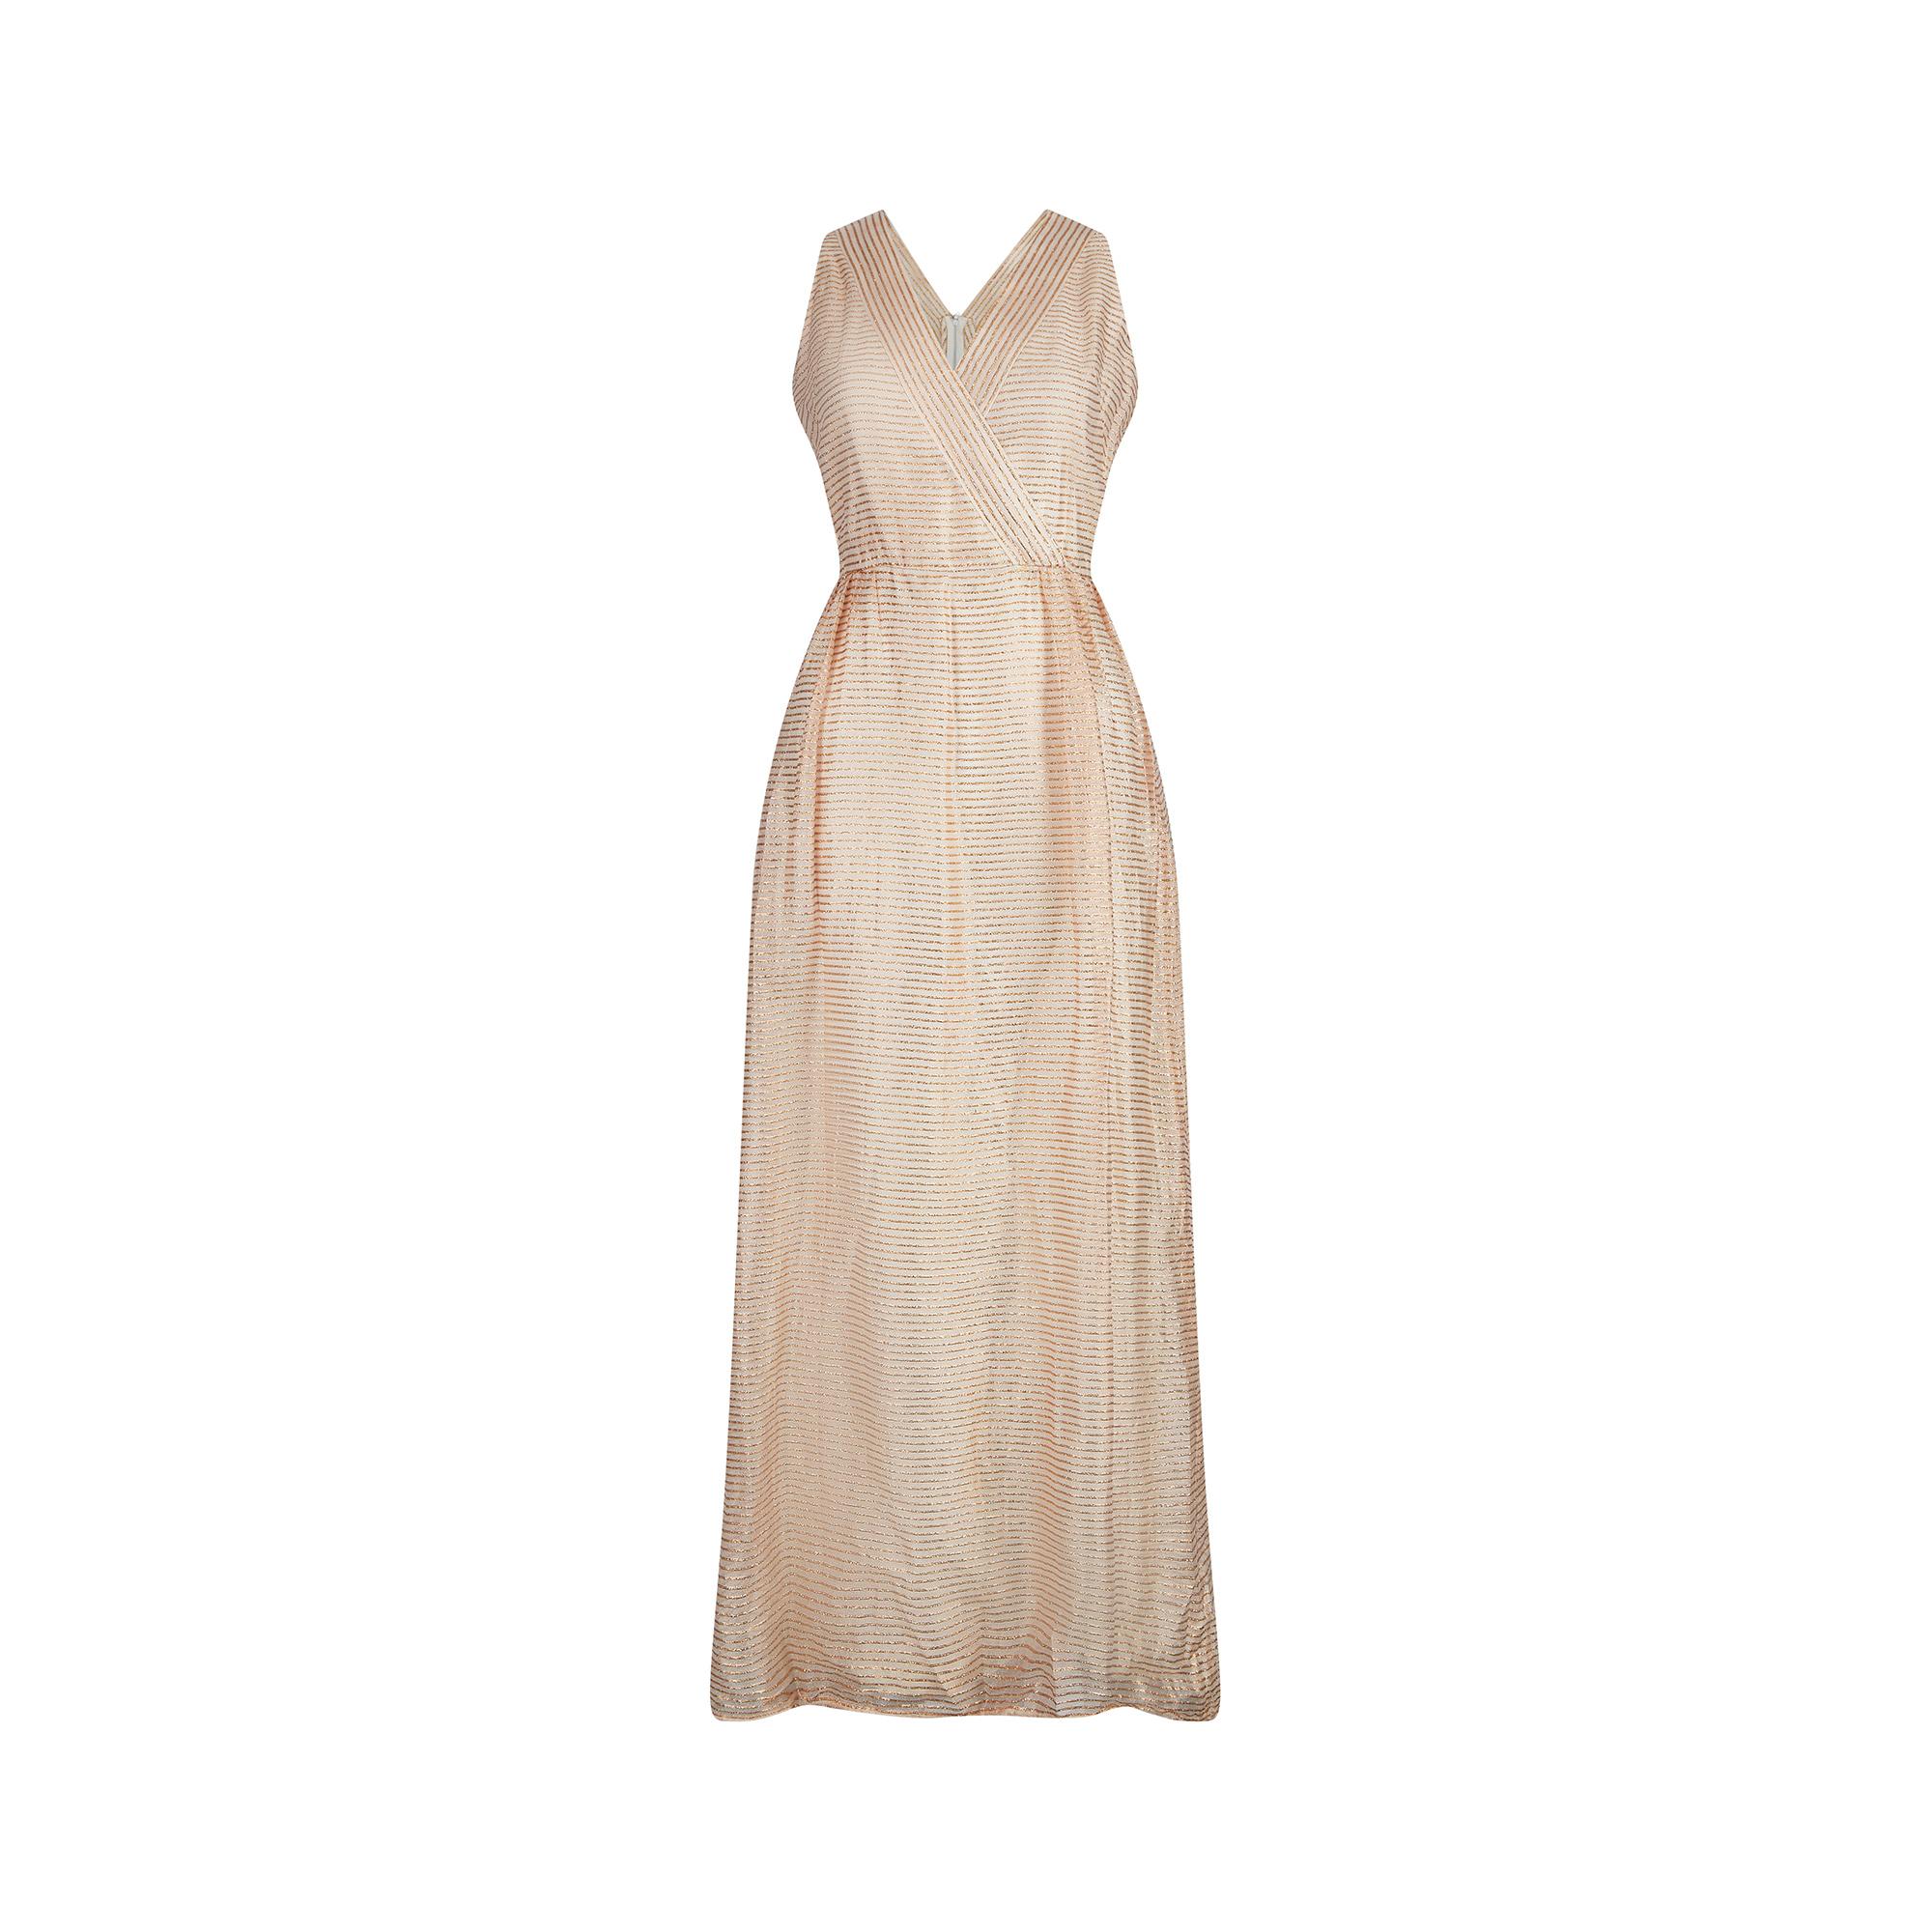 This 1960s cream and gold lurex maxi dress by Jean Allen could easily be dressed up for a formal event or worn more informally as resort wear. It is sleeveless and features a V neck crossover front, connecting at the waistband to create a flattering